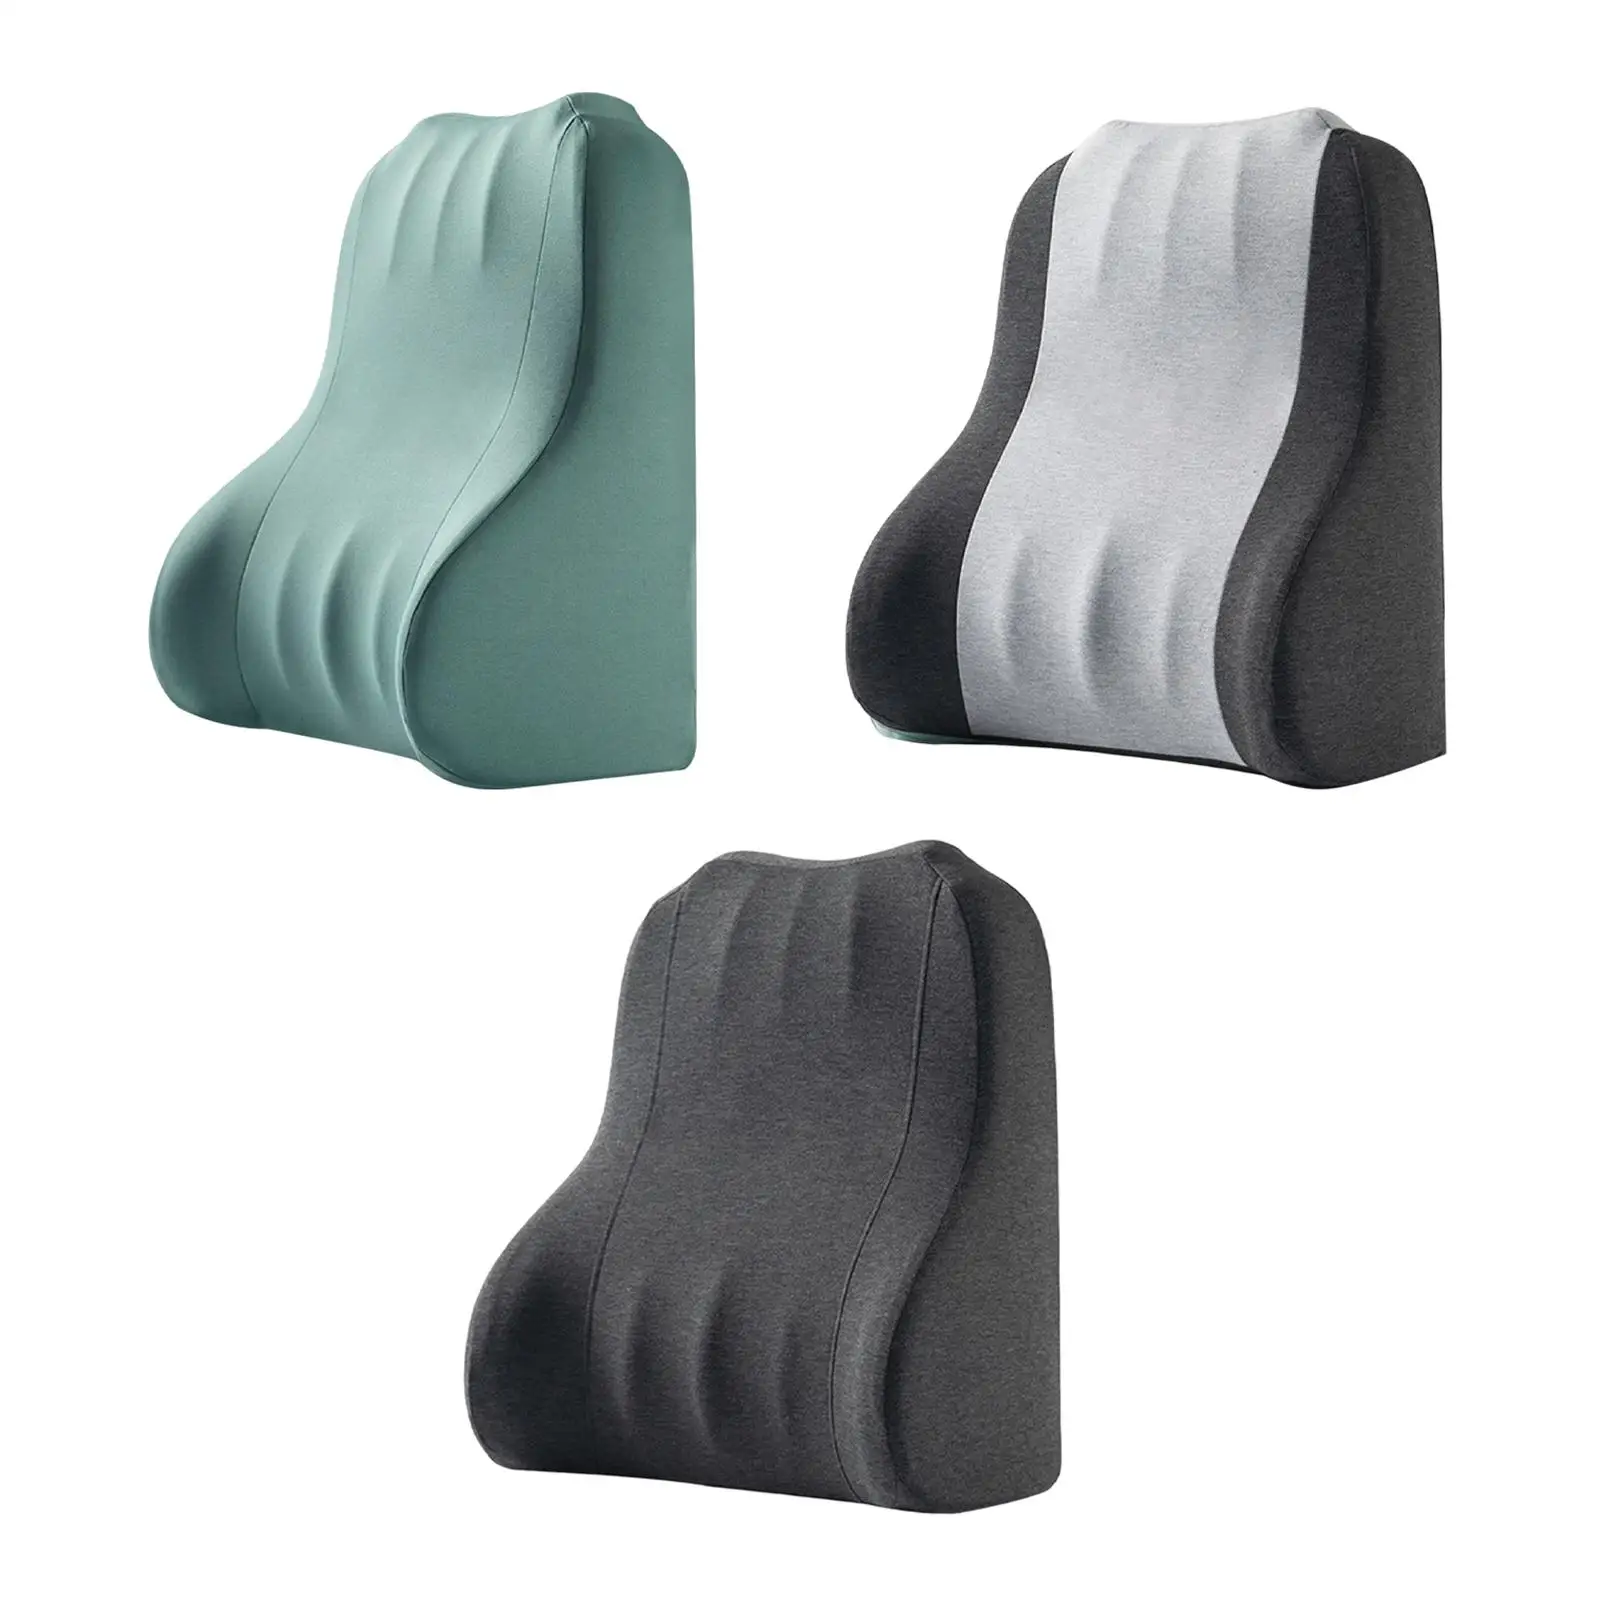 Waist Support Cushion Back Support Cushion Neck Support for Office Chair Sofa